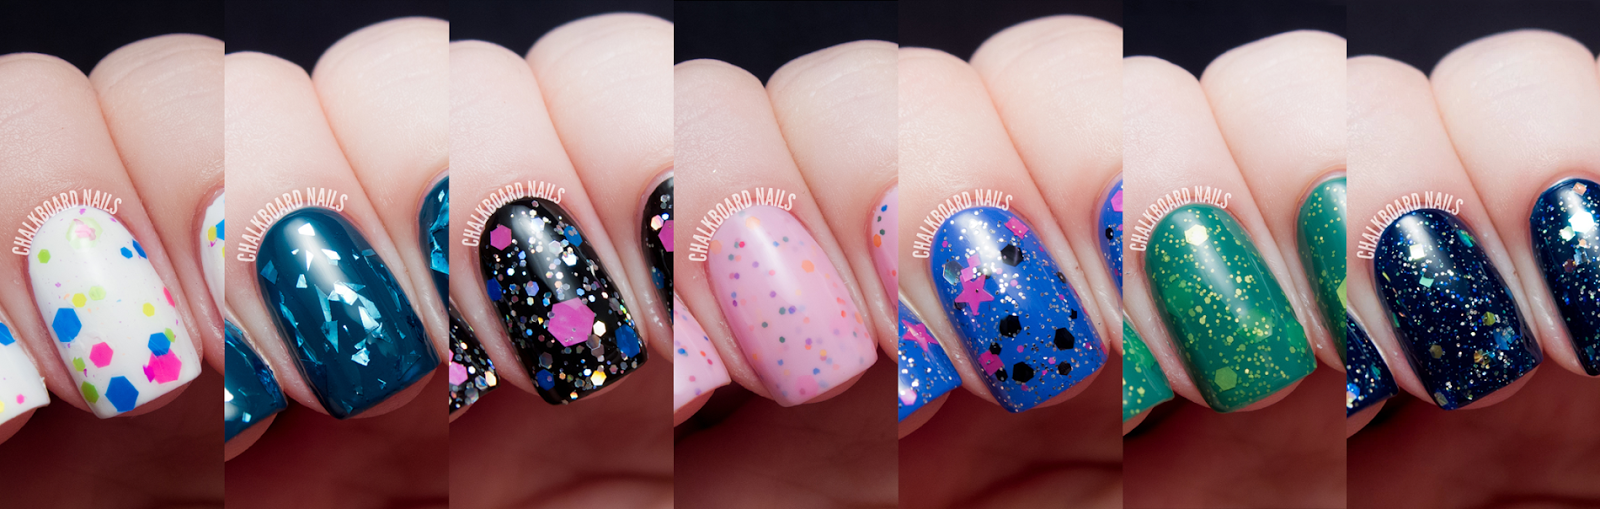 Starrily Swatch and Review (+ Giveaway) | Chalkboard Nails | Phoenix ...